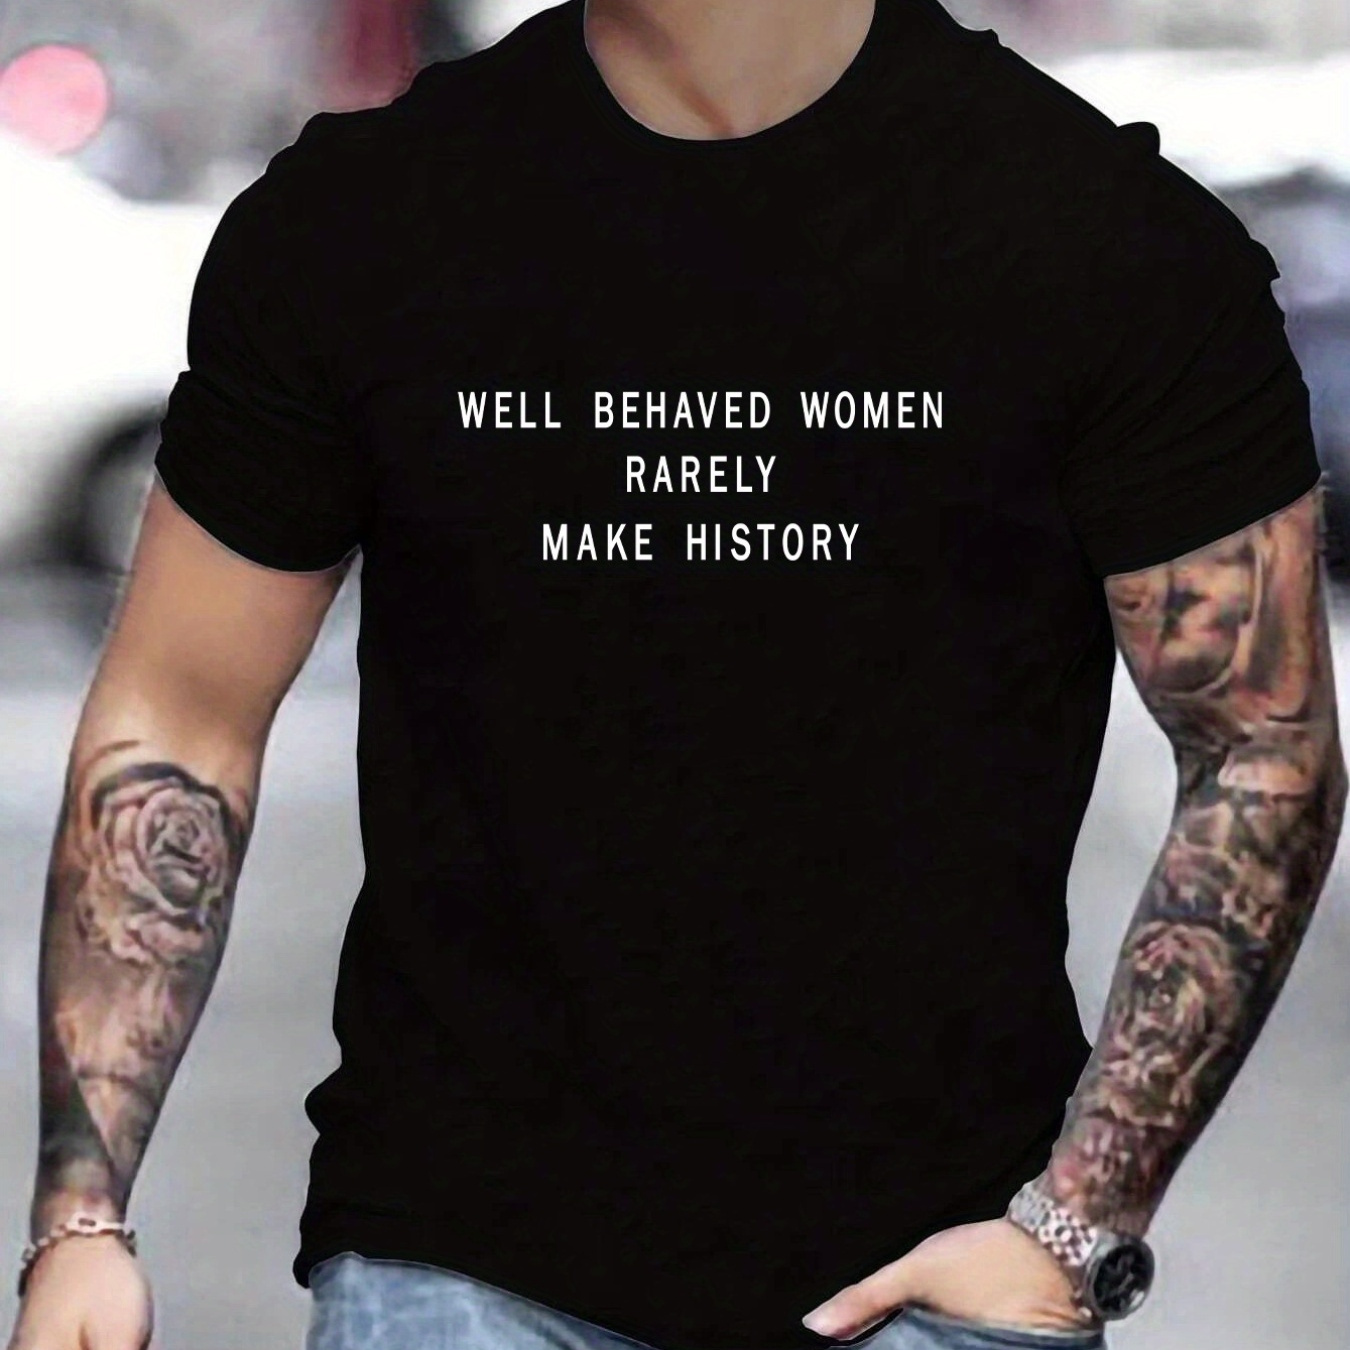 

'well Behaved Women Rarely Make History' Slogan Pattern Print Men's Comfy T-shirt, Graphic Tee Men's Summer Outdoor Clothes, Men's Clothing, Tops For Men